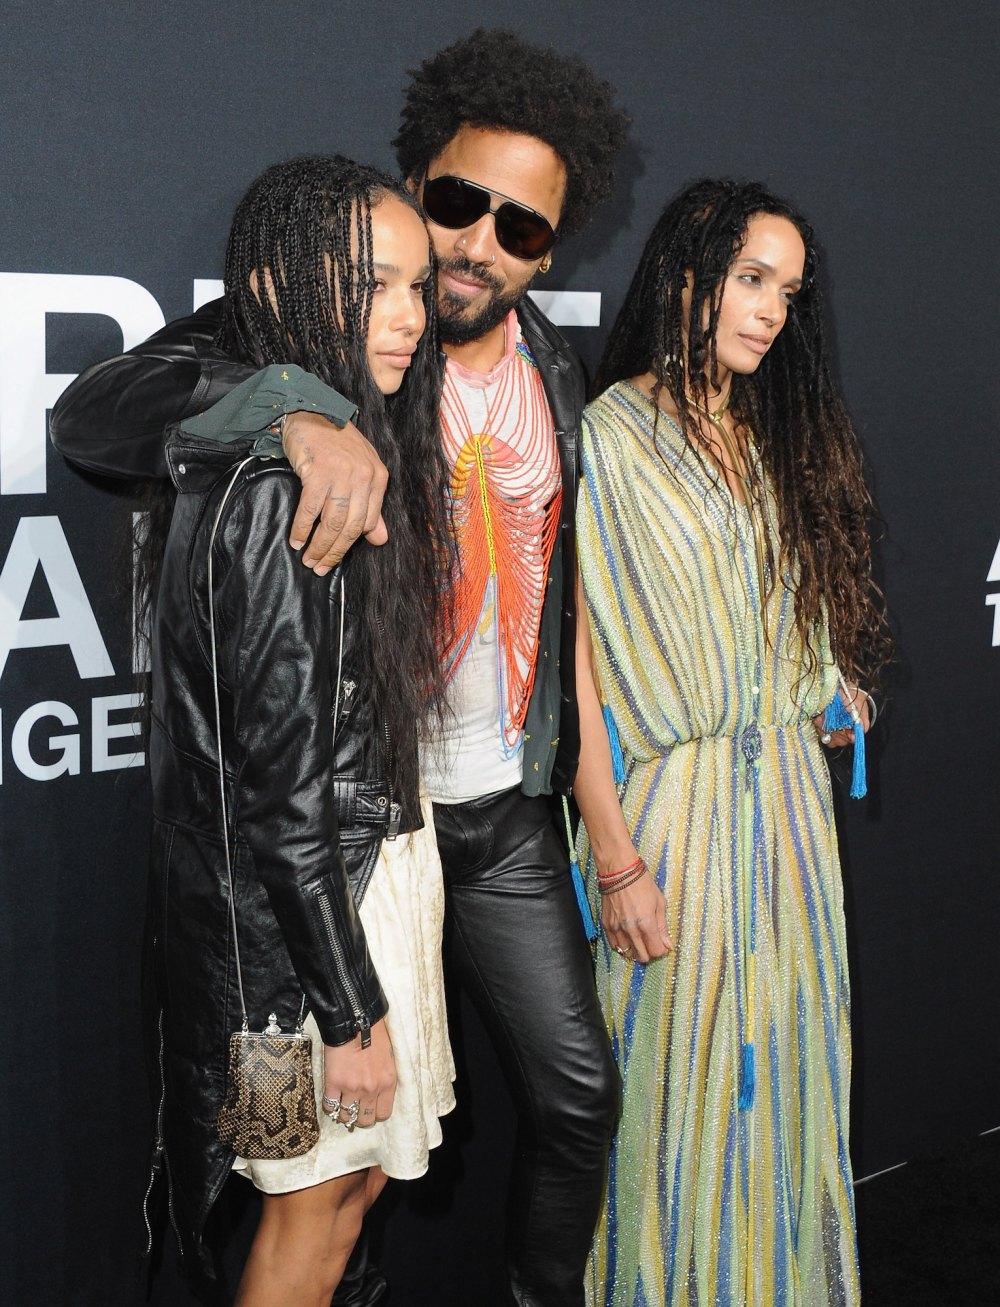 Lenny Kravitz Hasn’t Had a Serious Relationship for 9 Years 2